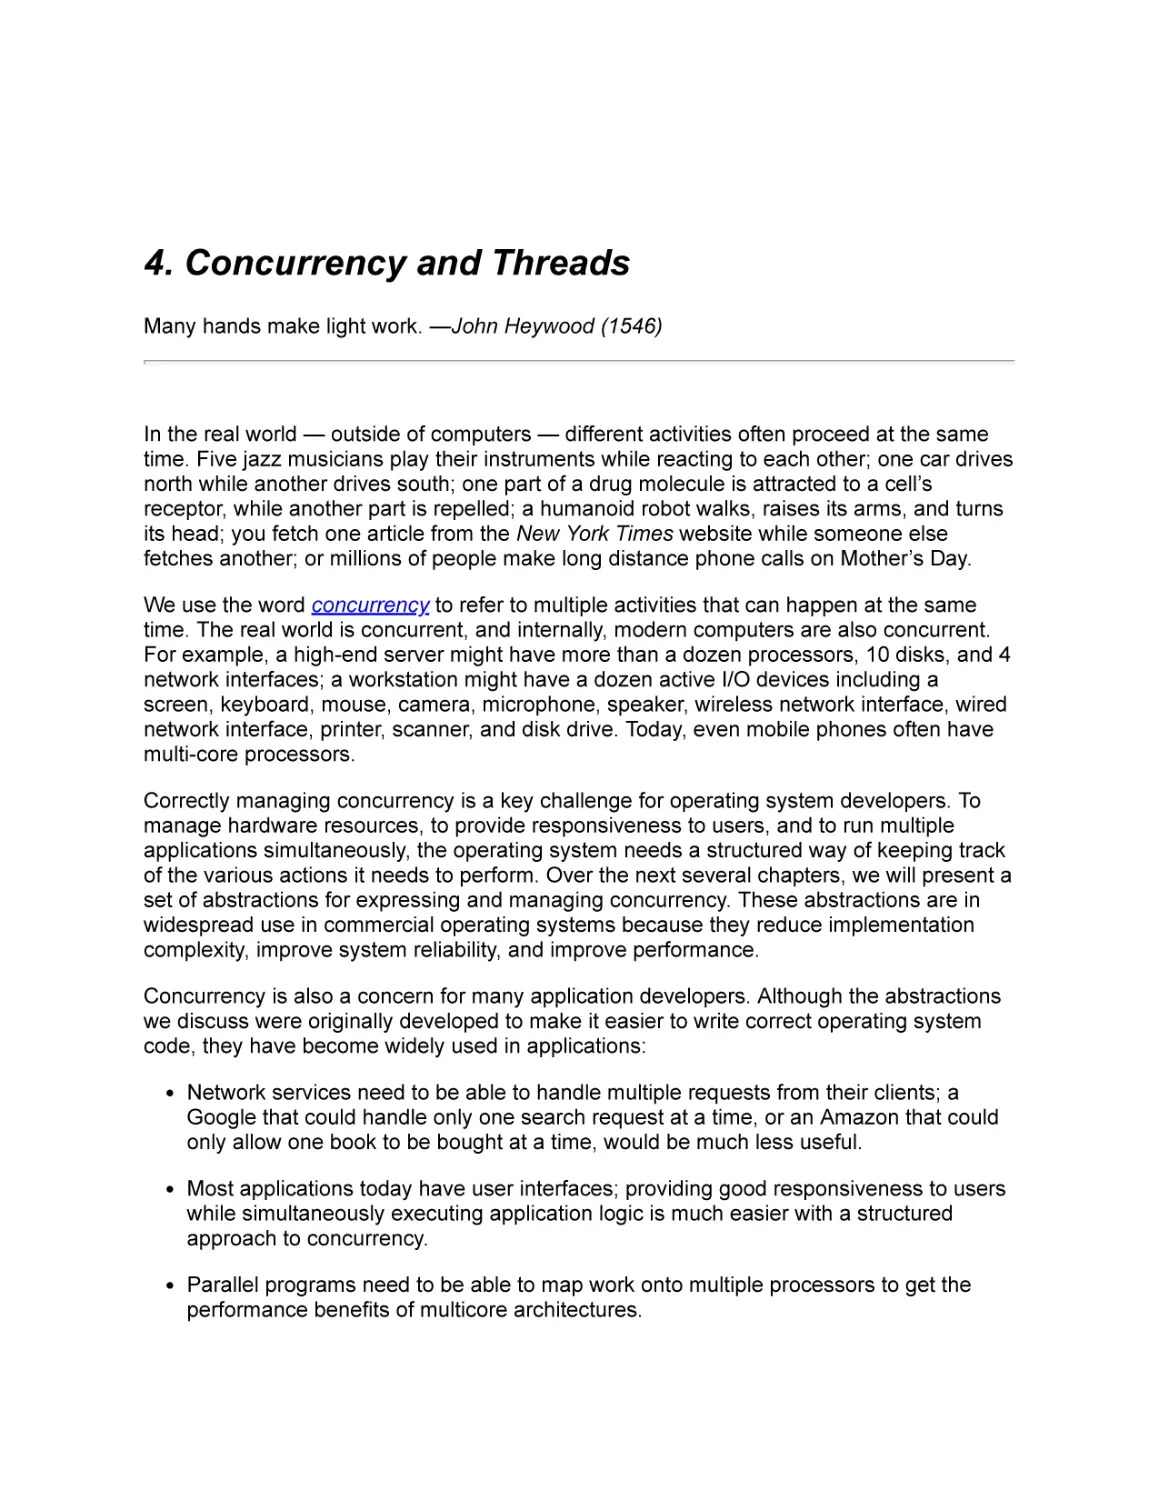 4 Concurrency and Threads